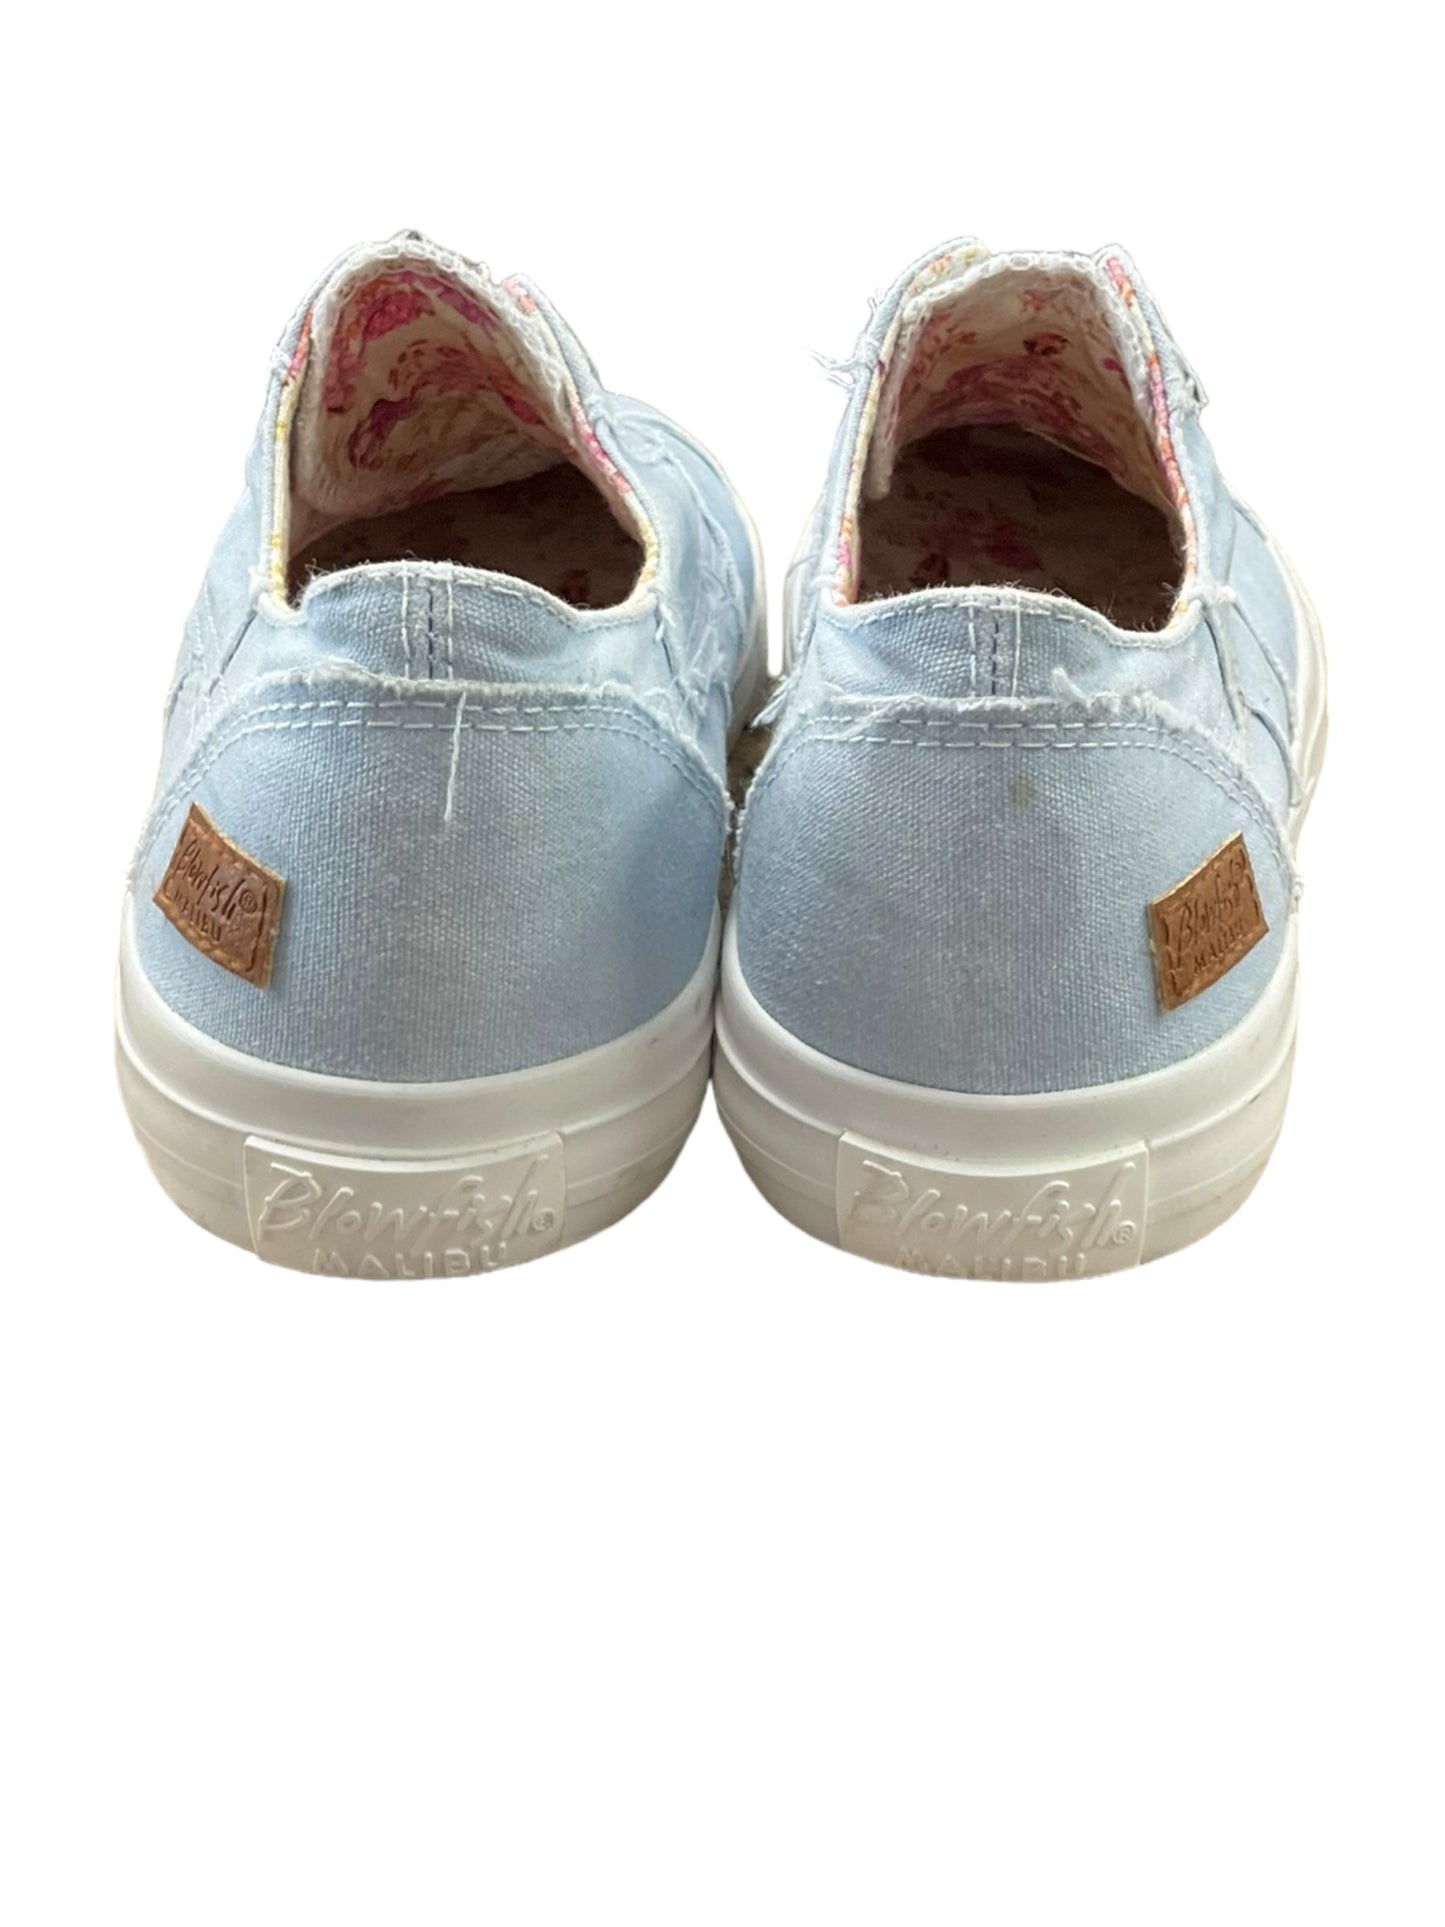 Blue Shoes Sneakers Blowfish, Size 8